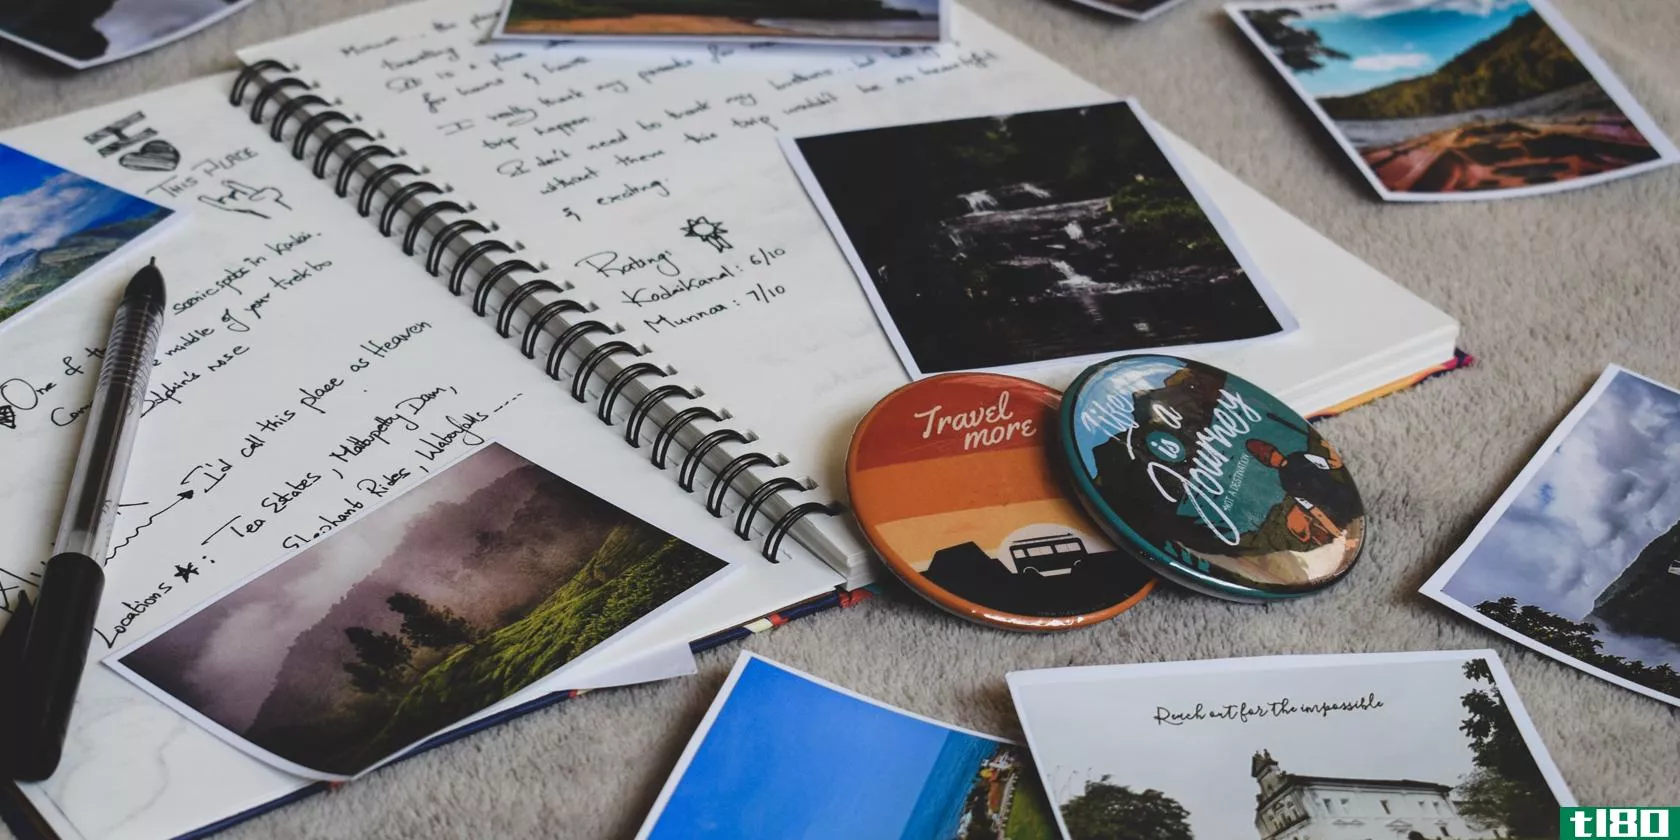 A ringed notebook surrounded by scattered photographs